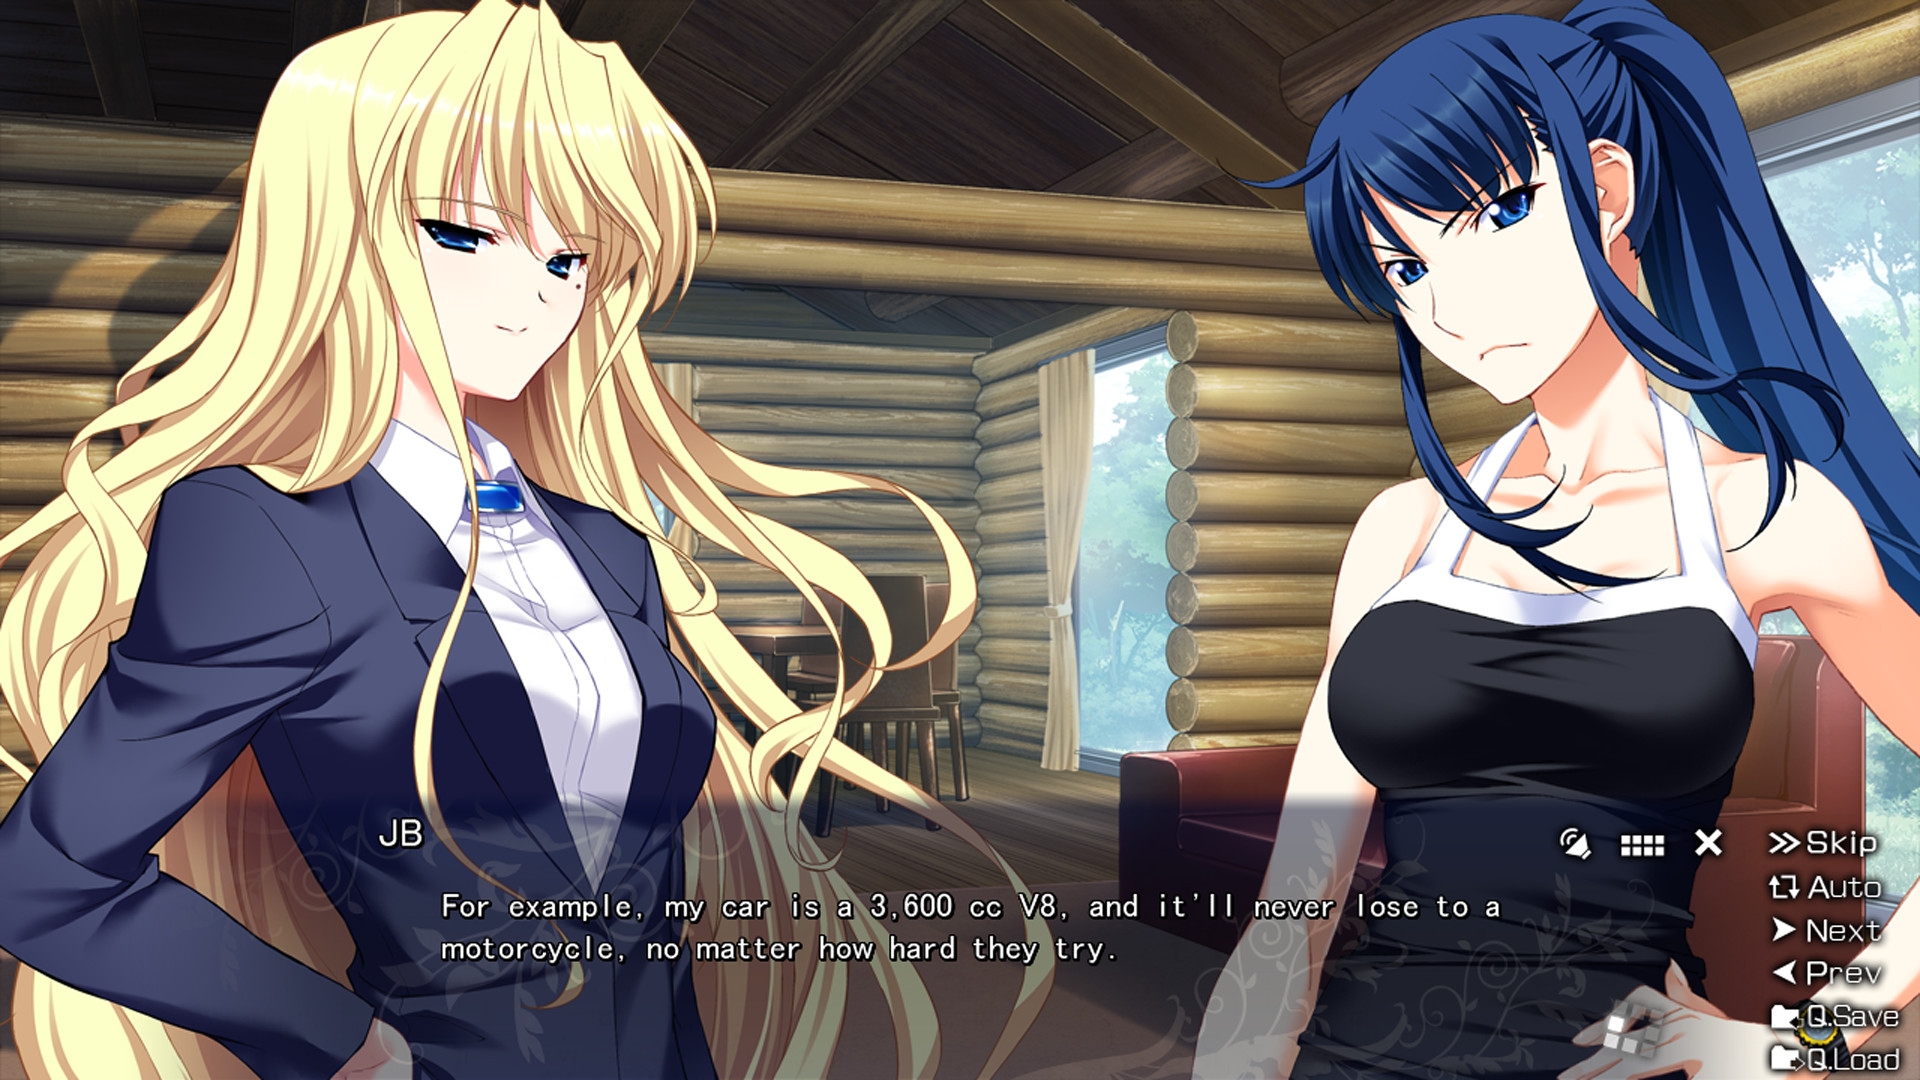 Download The Afterglow of Grisaia Full PC Game